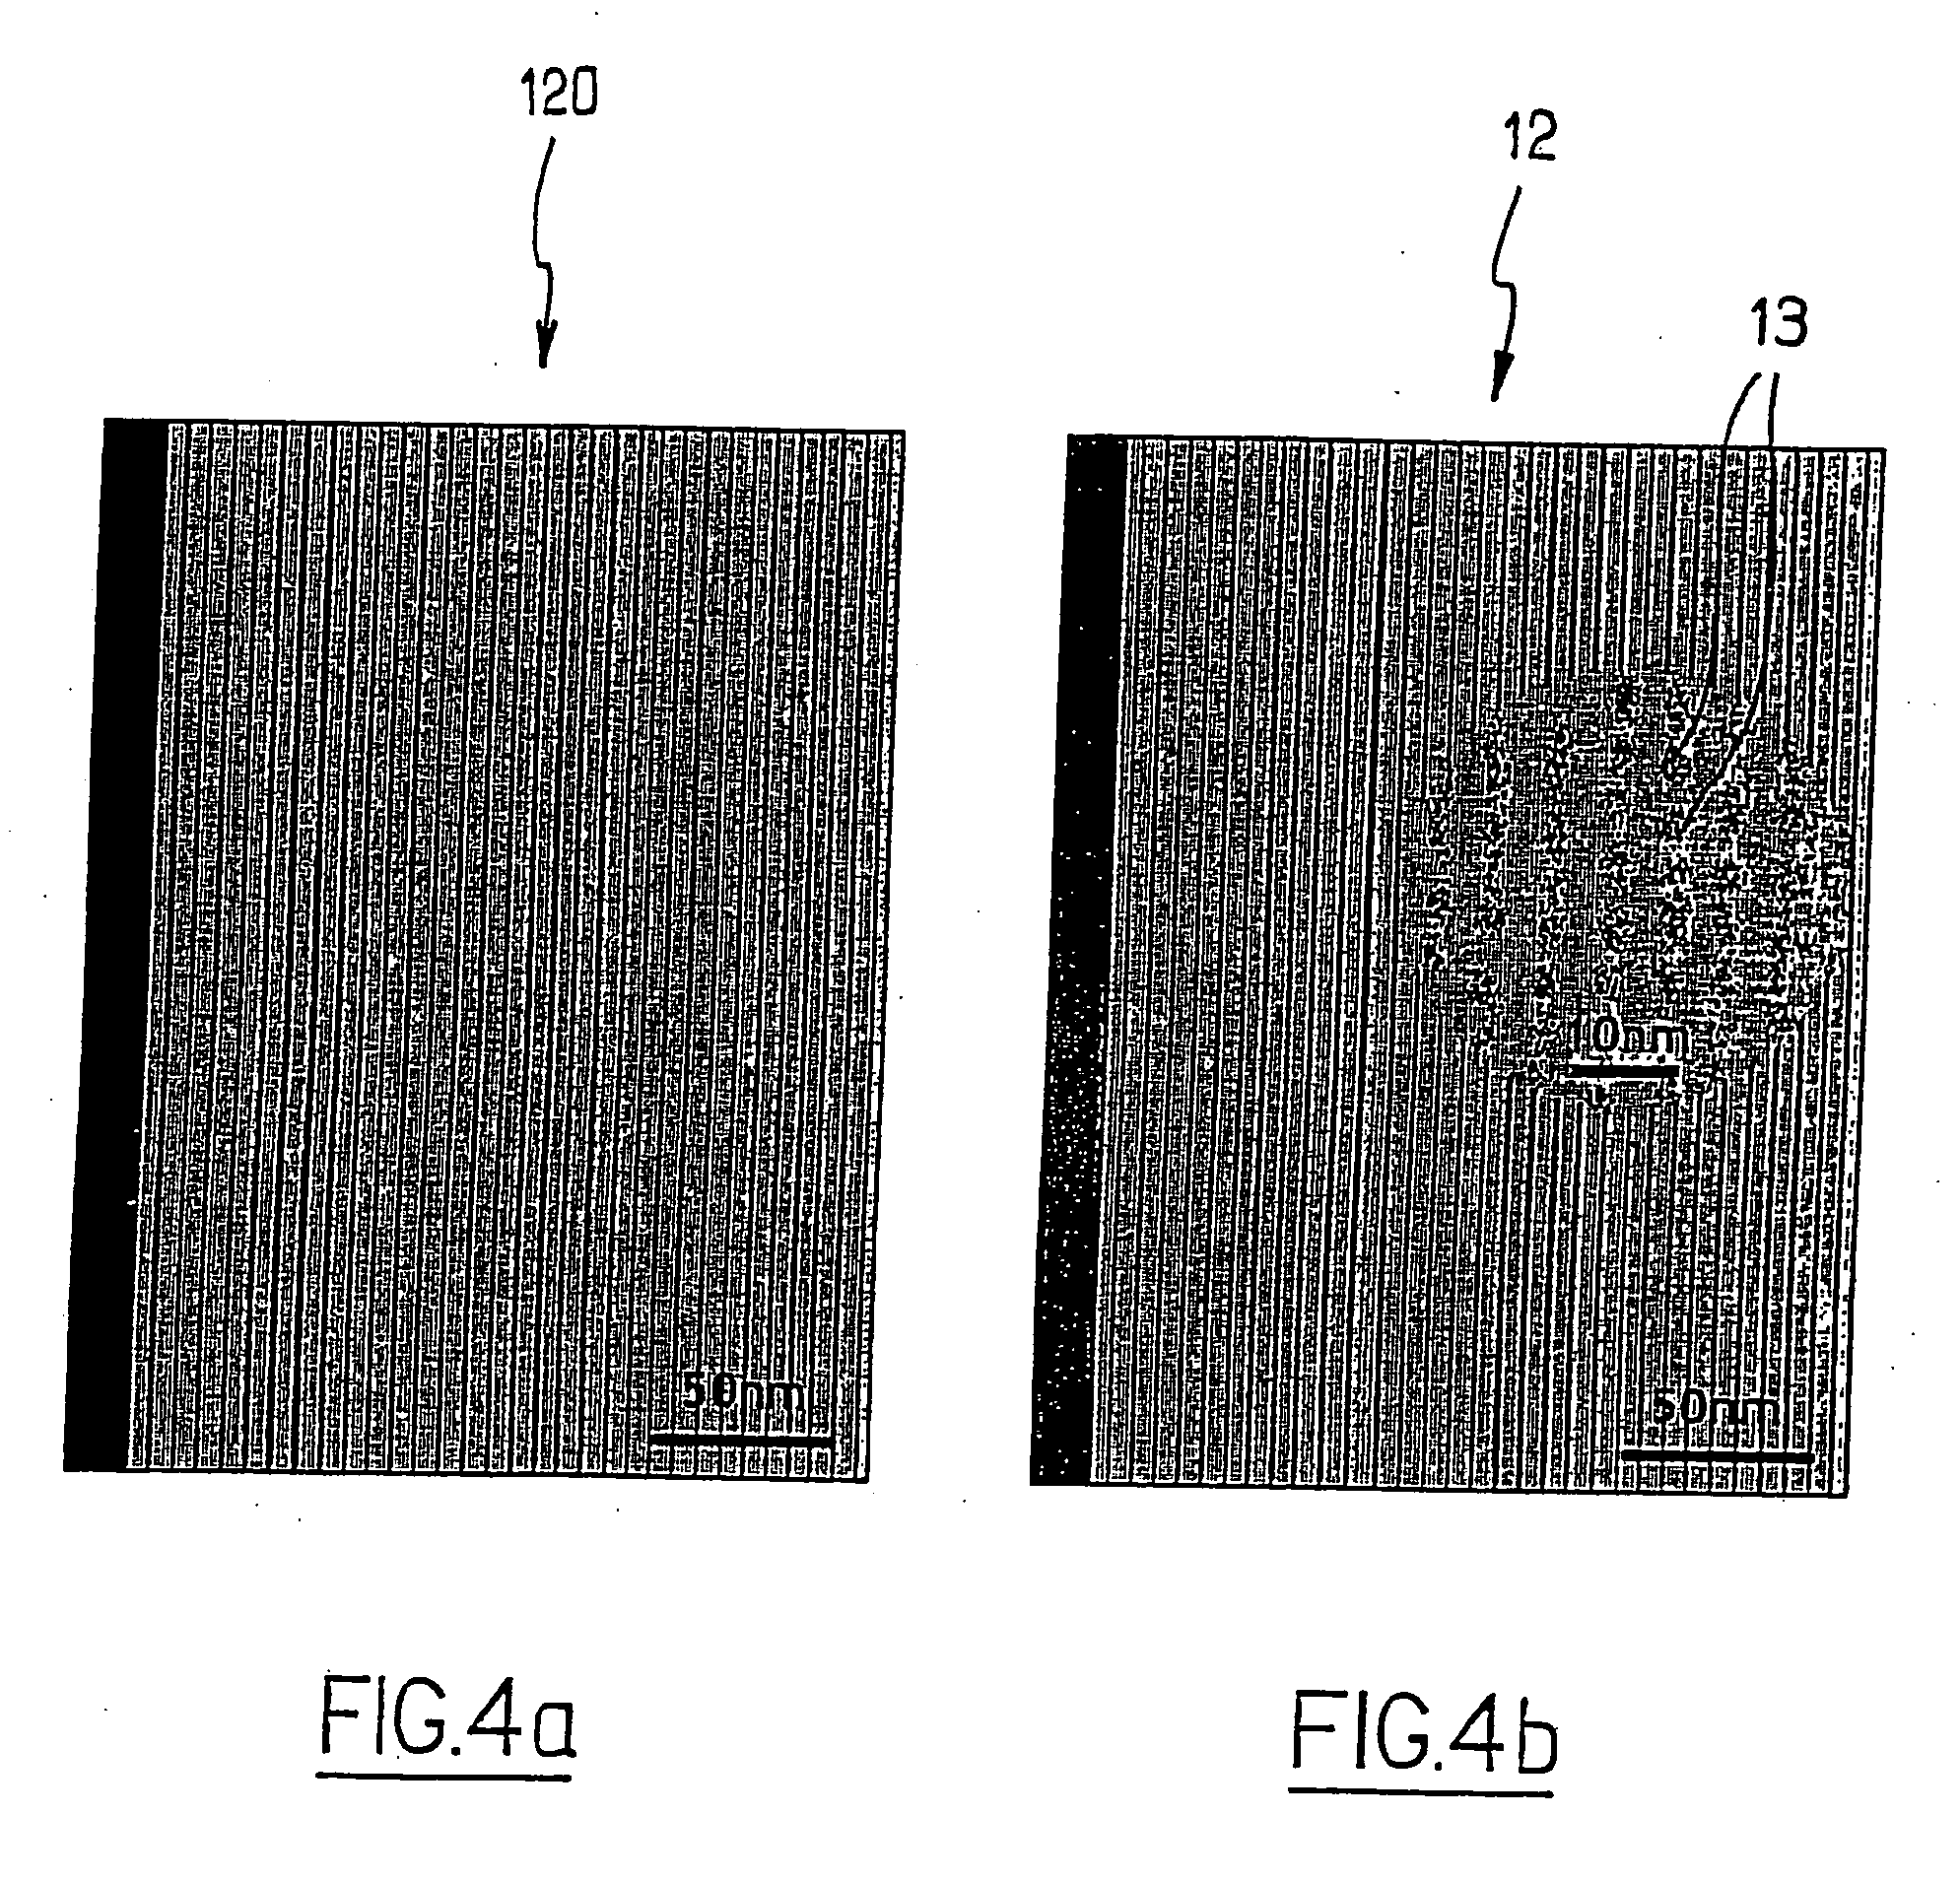 Method of fabricating a release substrate